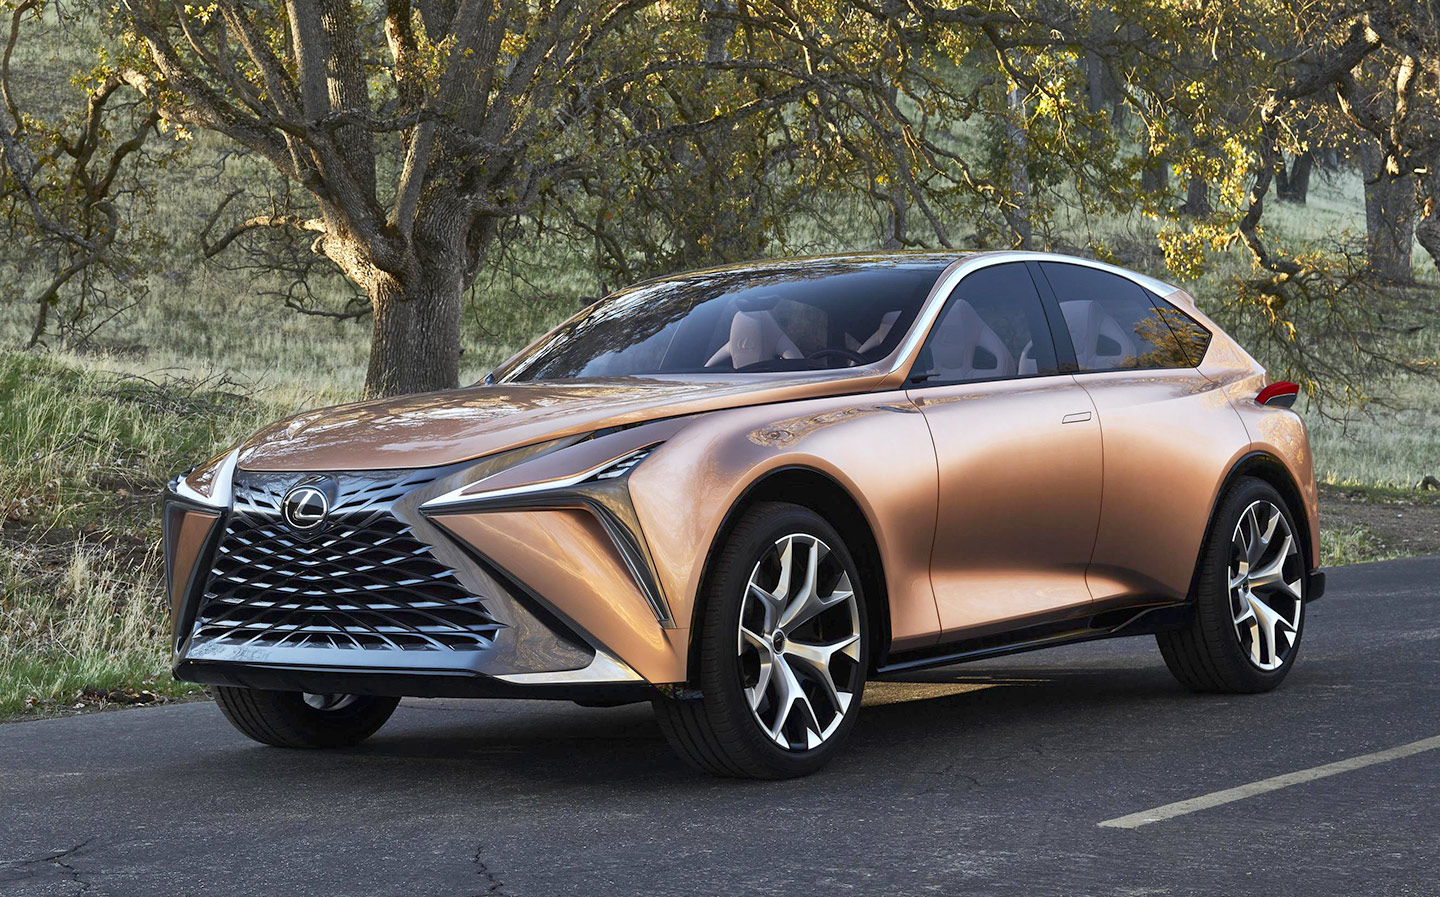 2019 Lexus LF-1 Limitless SUV at the 2018 Detroit Motor Show